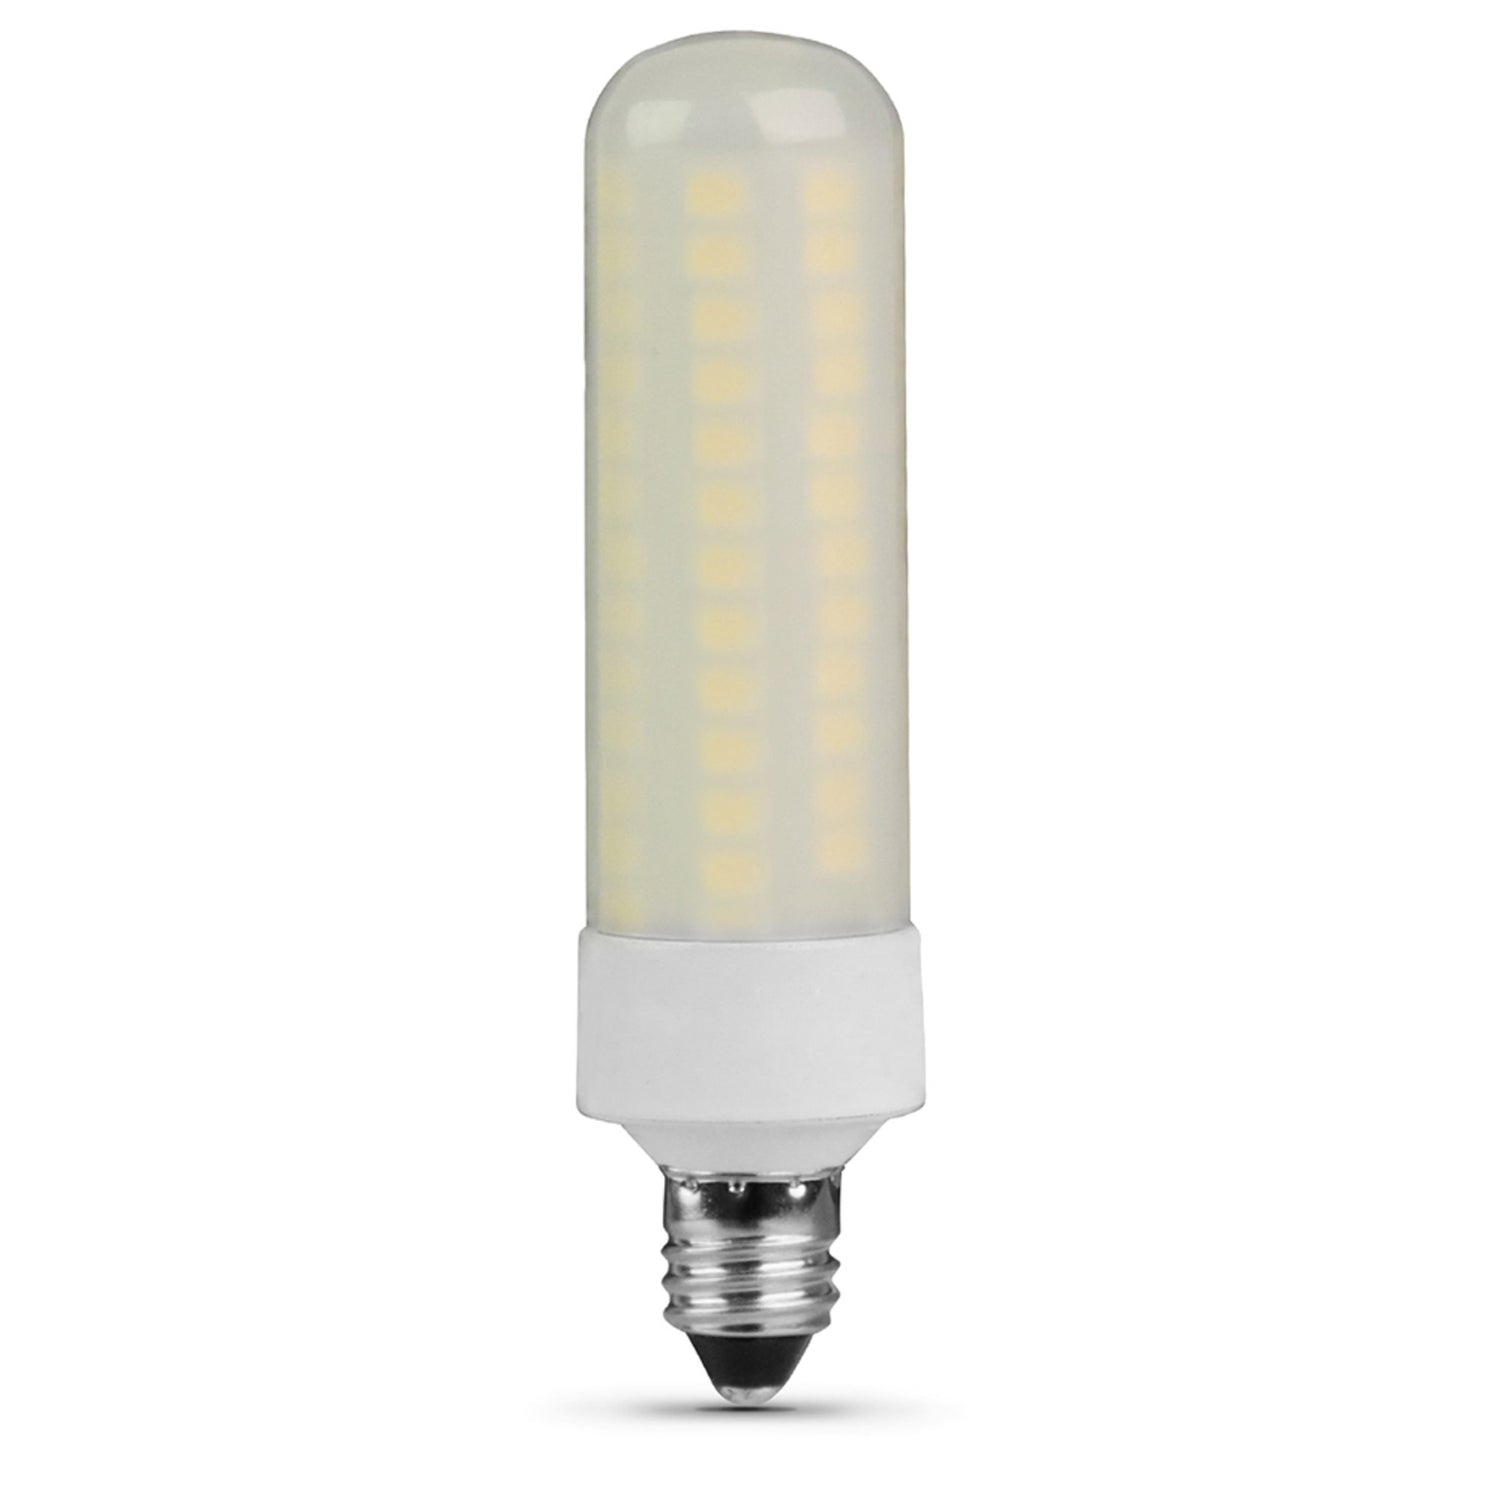 6.5W (75W Replacement) Bright White (3000K) Dimmable E11 Base T4 Specialty LED